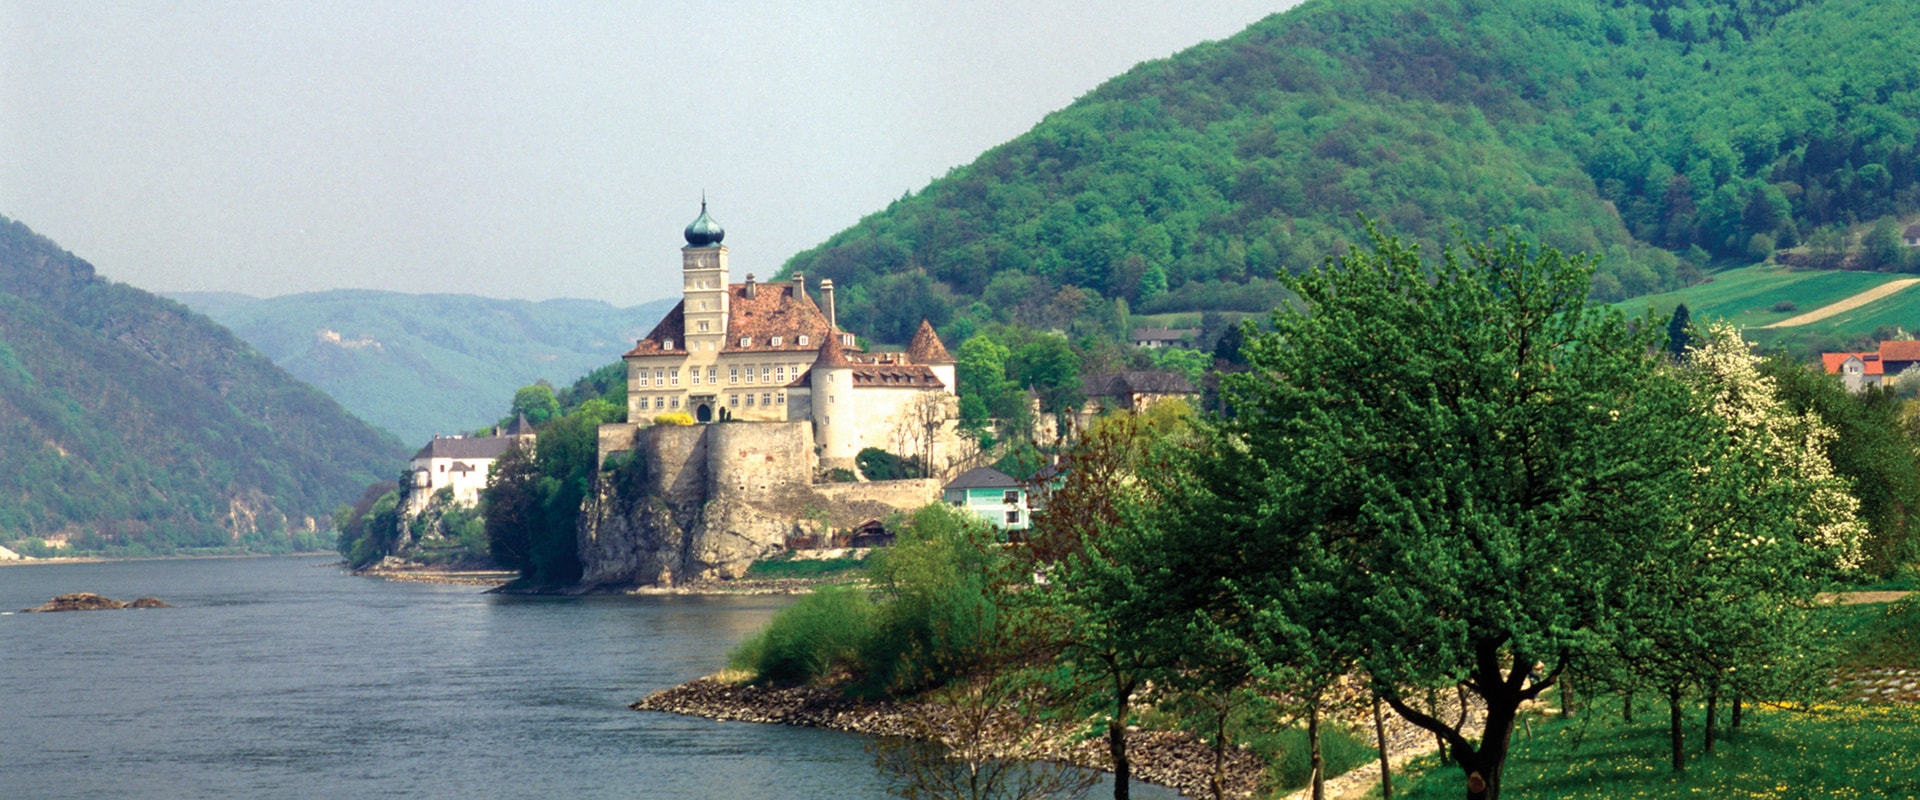 river cruise from budapest to nuremberg